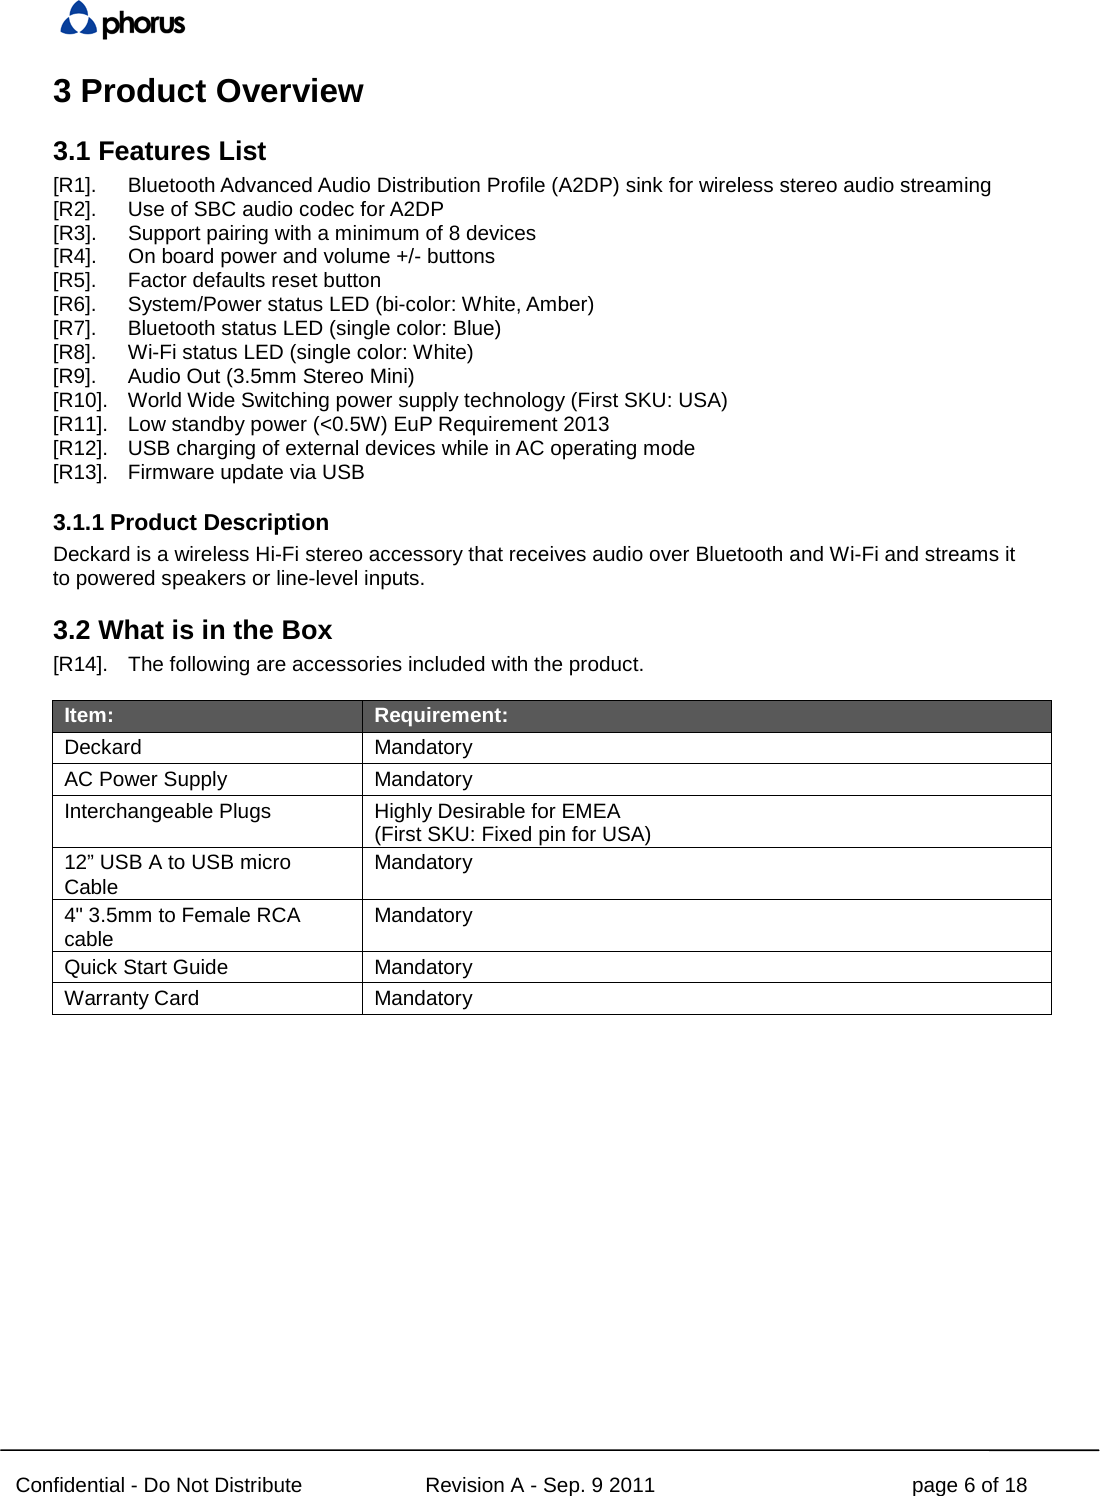  Confidential - Do Not Distribute Revision A - Sep. 9 2011 page 6 of 18 3 Product Overview 3.1 Features List [R1]. Bluetooth Advanced Audio Distribution Profile (A2DP) sink for wireless stereo audio streaming [R2]. Use of SBC audio codec for A2DP [R3]. Support pairing with a minimum of 8 devices [R4]. On board power and volume +/- buttons [R5]. Factor defaults reset button [R6]. System/Power status LED (bi-color: White, Amber) [R7]. Bluetooth status LED (single color: Blue) [R8]. Wi-Fi status LED (single color: White) [R9]. Audio Out (3.5mm Stereo Mini) [R10]. World Wide Switching power supply technology (First SKU: USA) [R11]. Low standby power (&lt;0.5W) EuP Requirement 2013 [R12]. USB charging of external devices while in AC operating mode [R13]. Firmware update via USB 3.1.1 Product Description Deckard is a wireless Hi-Fi stereo accessory that receives audio over Bluetooth and Wi-Fi and streams it to powered speakers or line-level inputs. 3.2 What is in the Box [R14]. The following are accessories included with the product.  Item: Requirement: Deckard Mandatory AC Power Supply Mandatory Interchangeable Plugs Highly Desirable for EMEA (First SKU: Fixed pin for USA) 12” USB A to USB micro Cable Mandatory 4&quot; 3.5mm to Female RCA cable Mandatory Quick Start Guide Mandatory Warranty Card Mandatory    